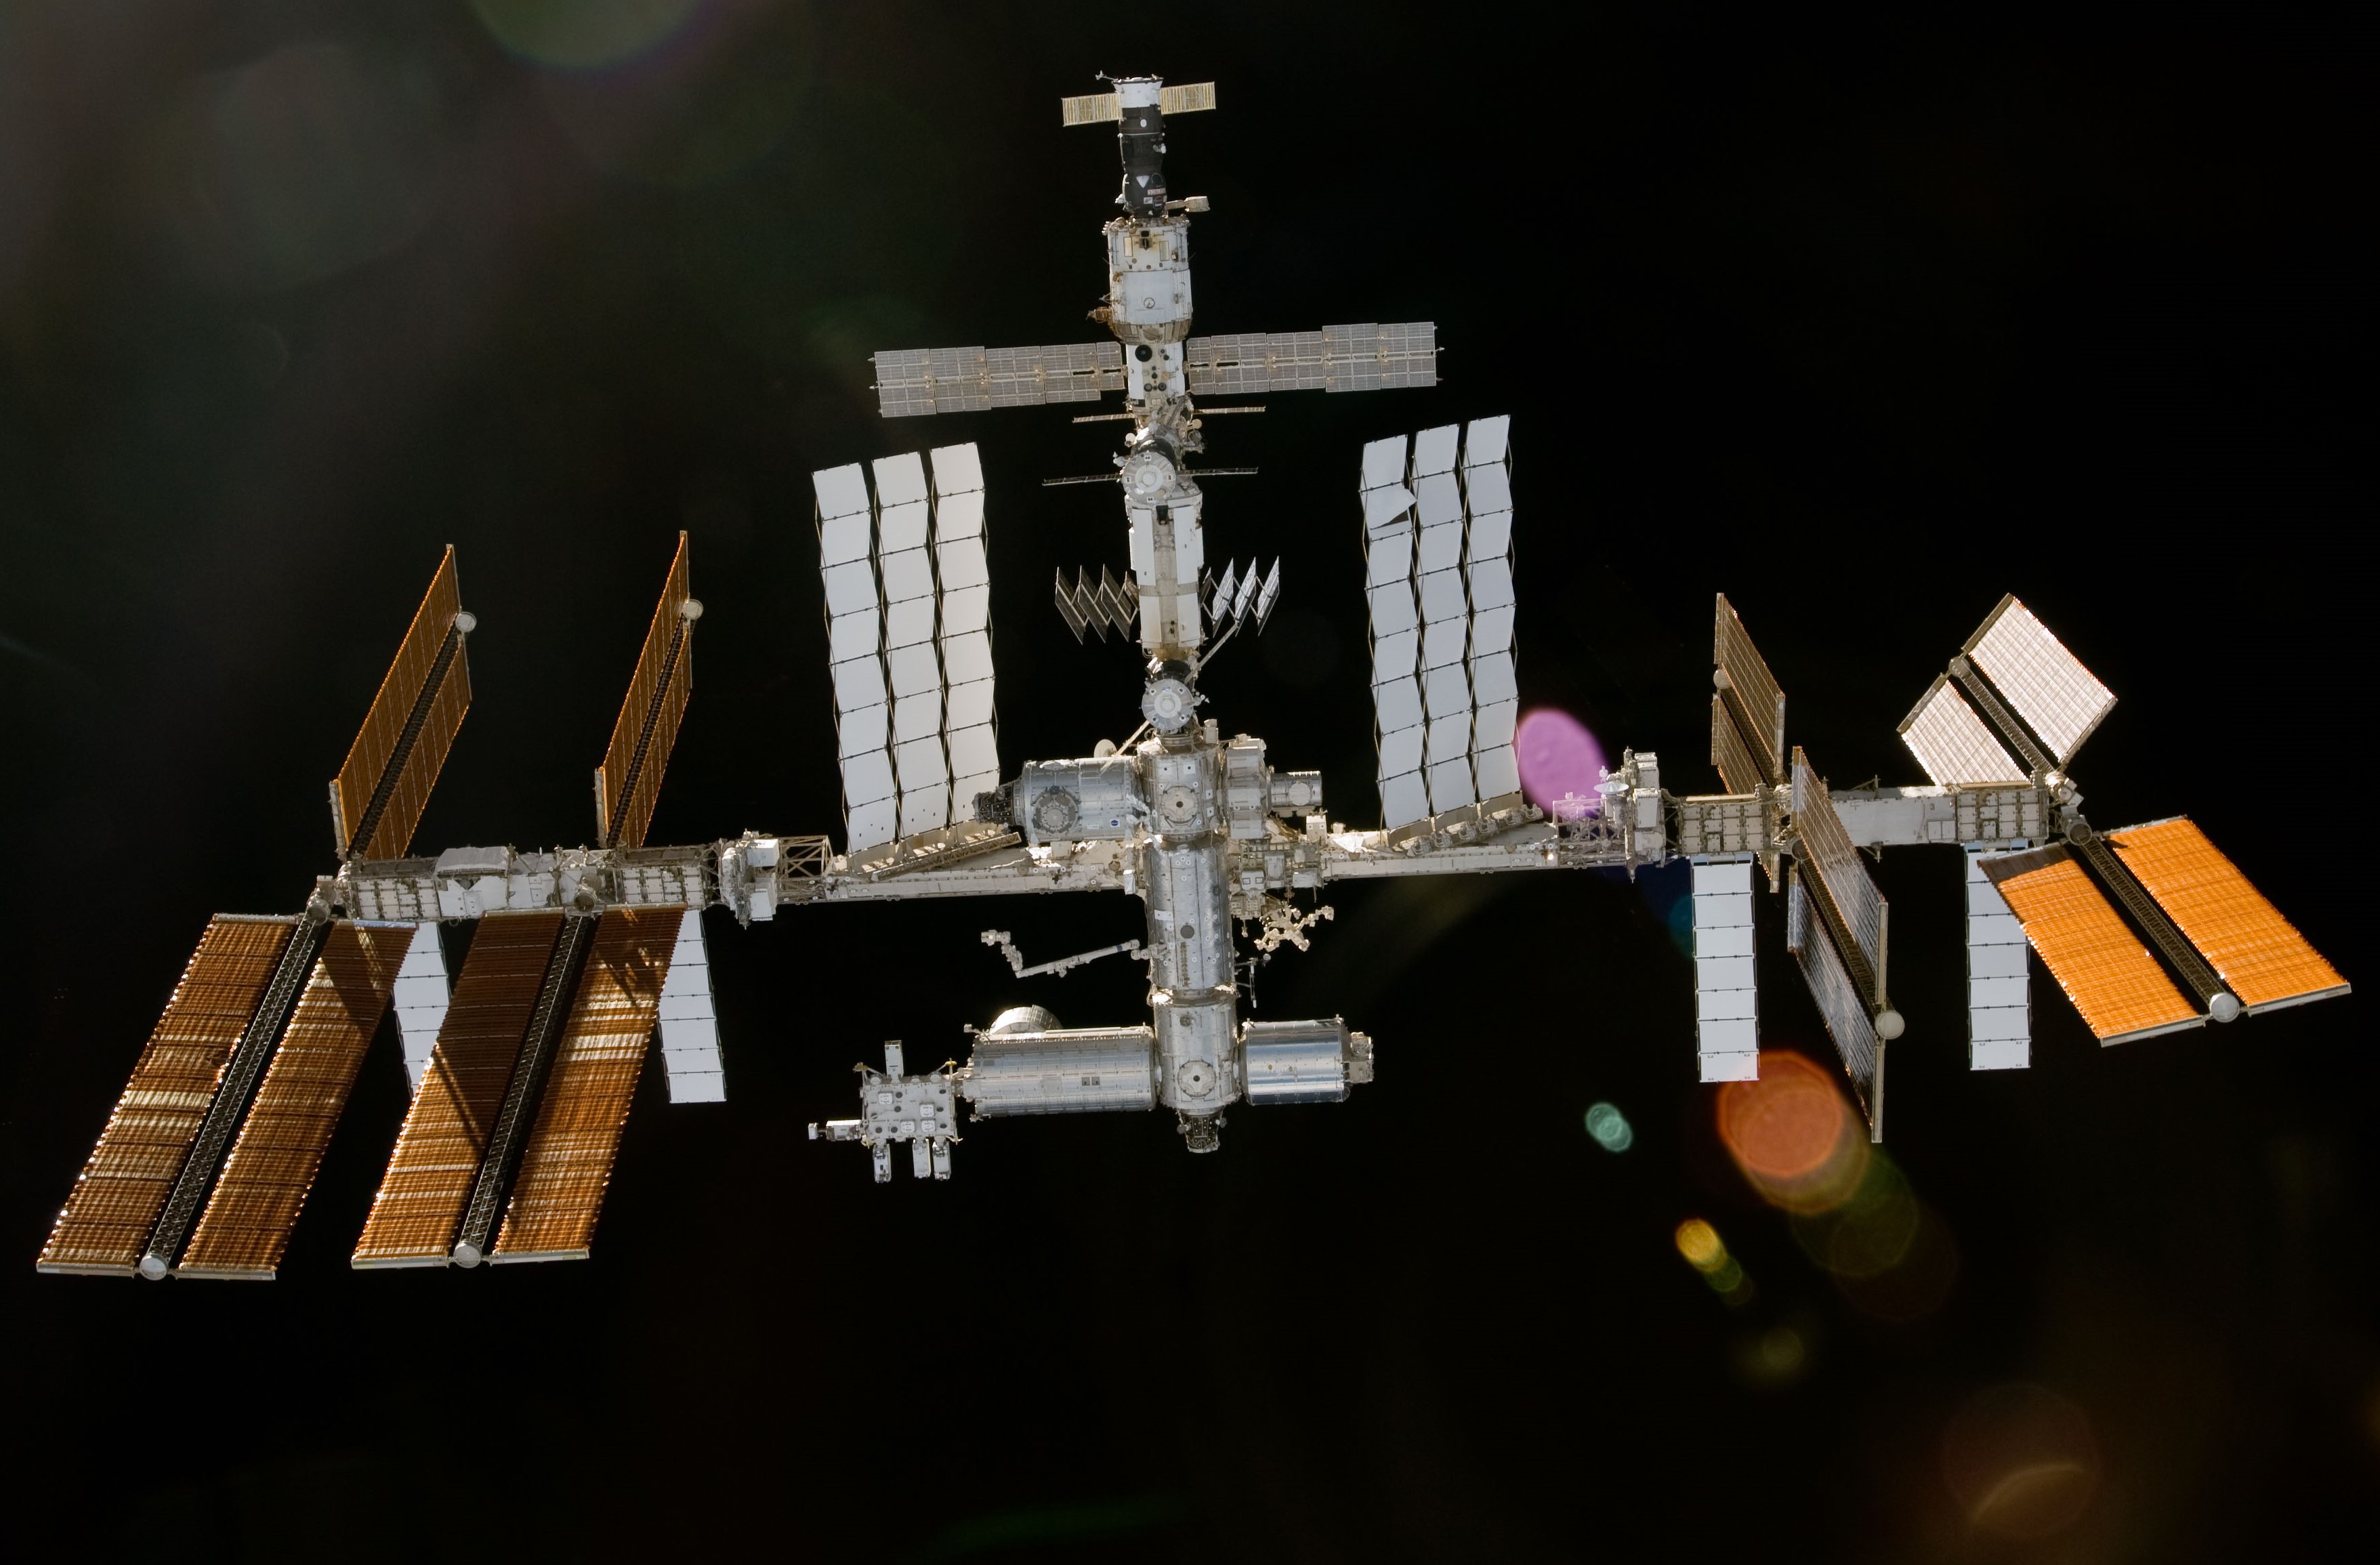 The space station as seen from the departing STS-130, showing the Tranquility Node 3 and Cupola berthed at the Unity Node 1, left of center.